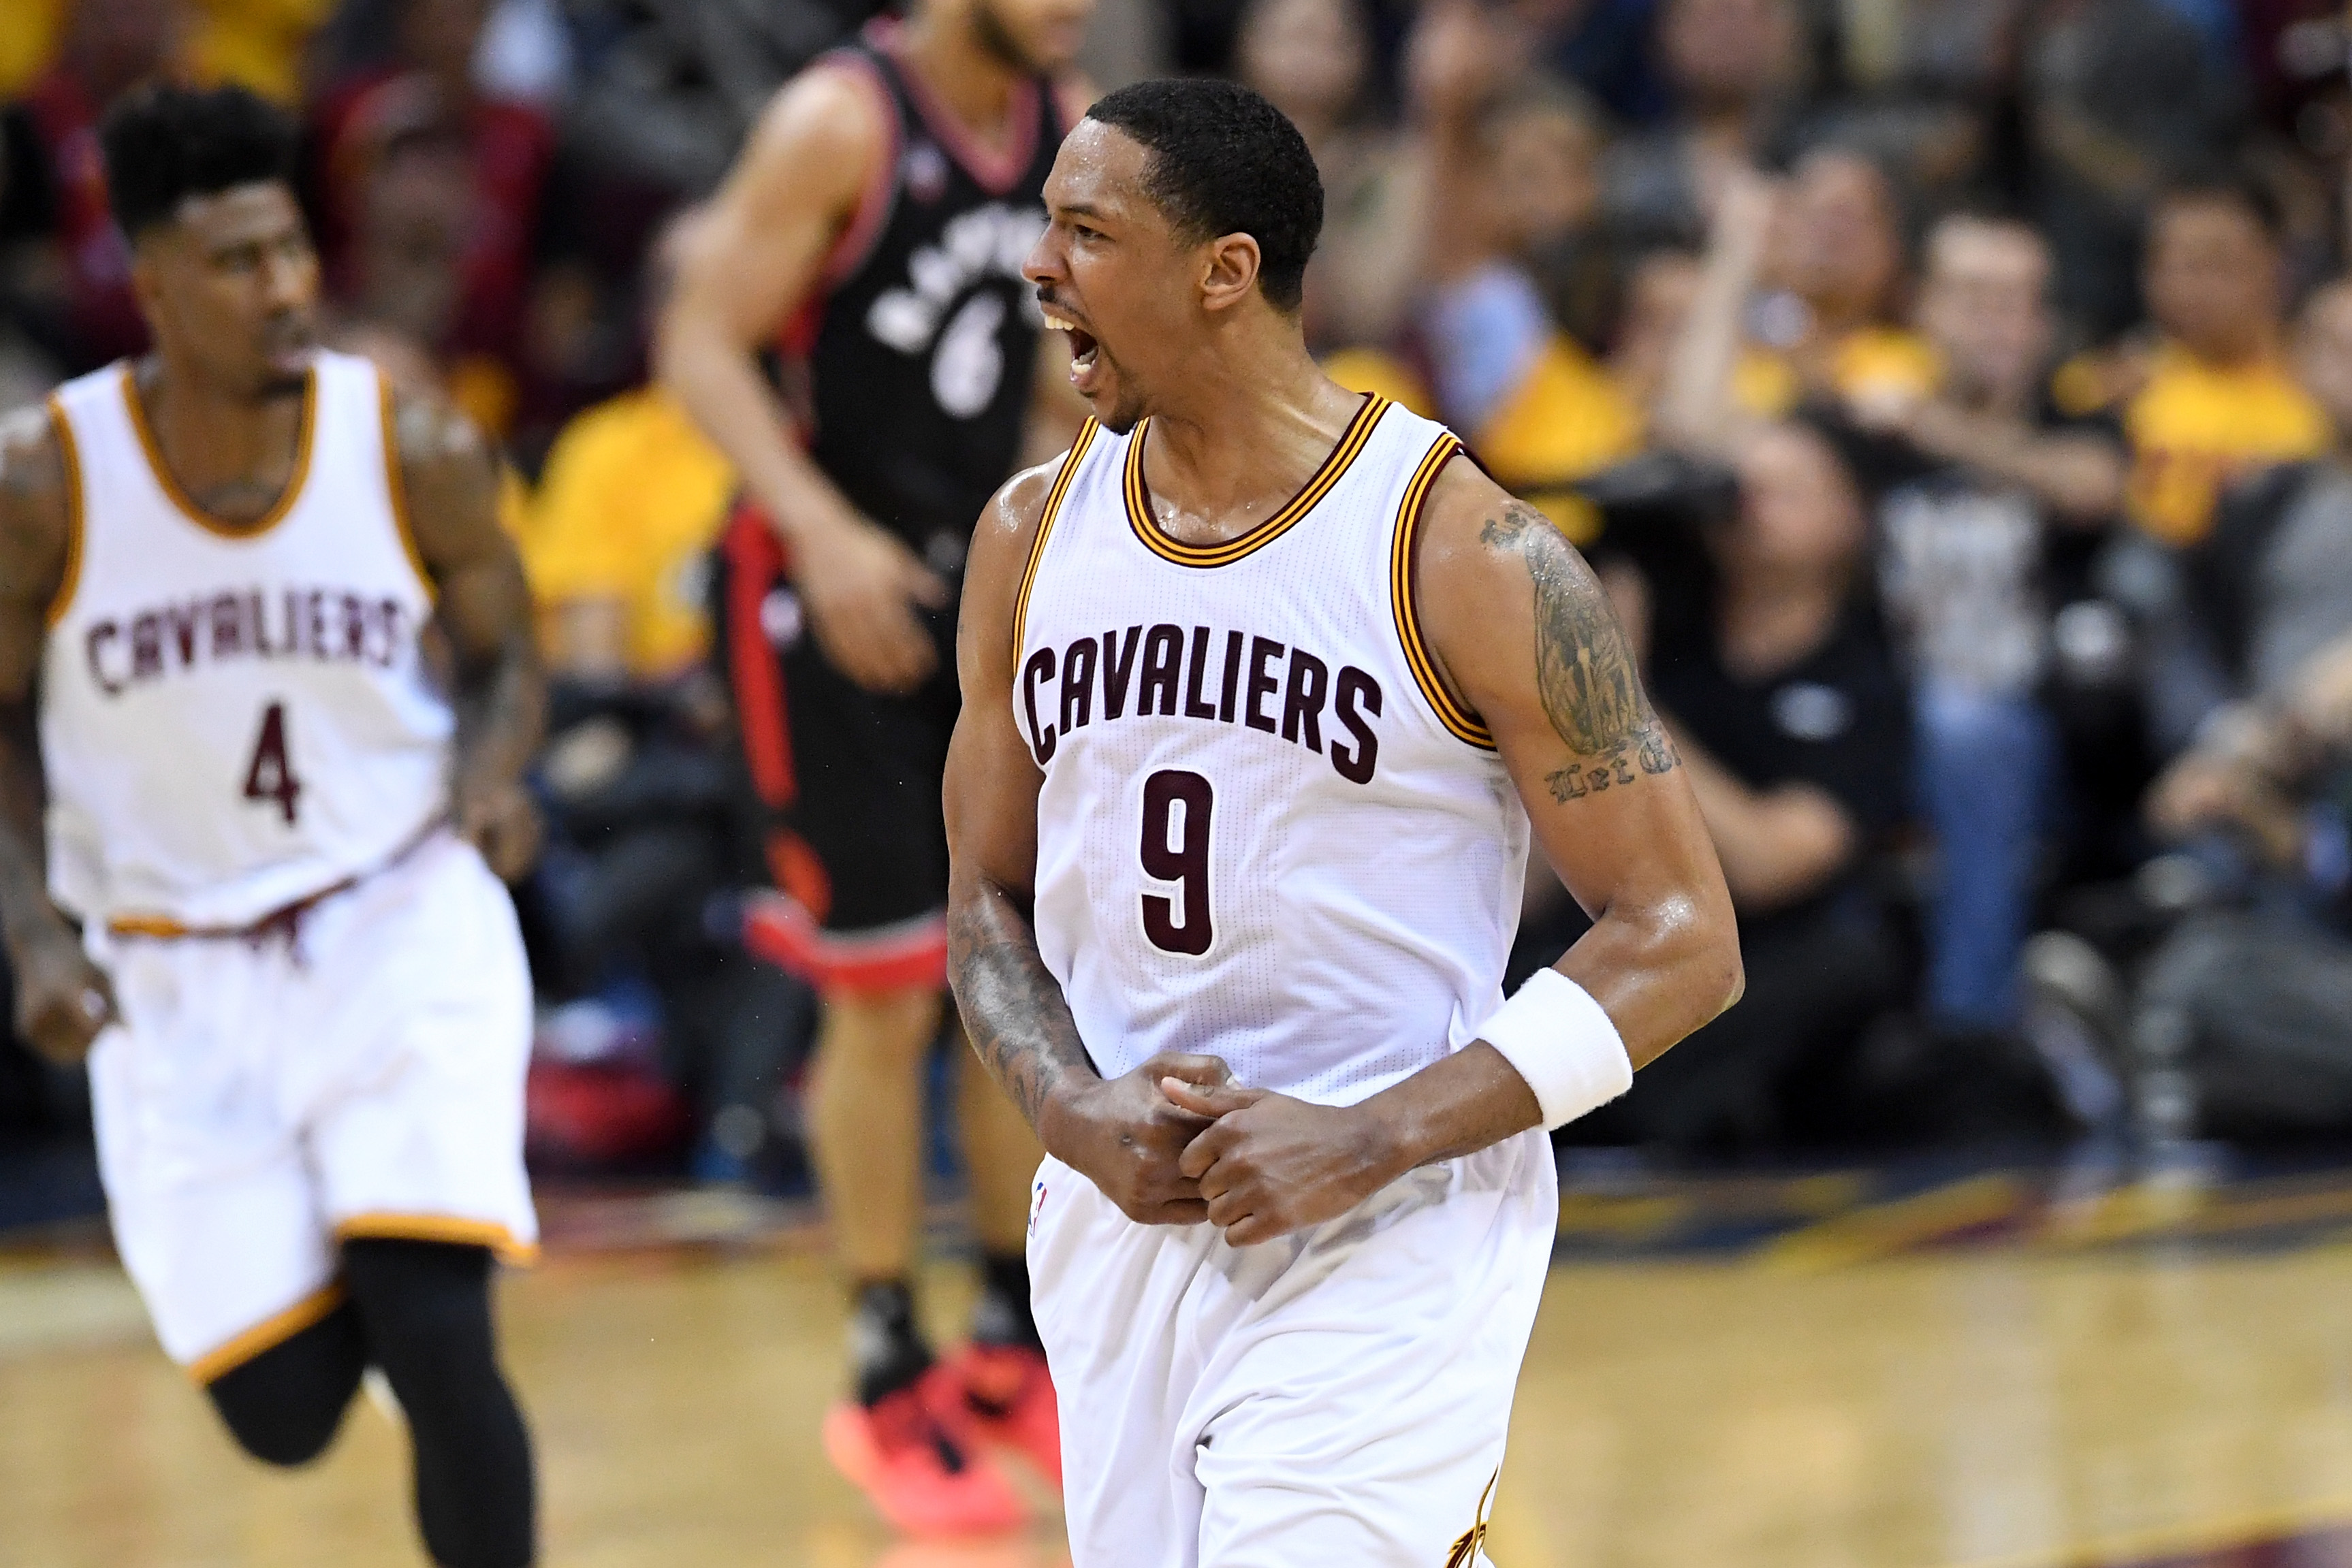 CLEVELAND, OH - MAY 25: Channing Frye #9 of the Cleveland Cavaliers reacts after a play in the third quarter against the Toronto Raptors in game five of the Eastern Conference Finals during the 2016 NBA Playoffs at Quicken Loans Arena on May 25, 2016 in Cleveland, Ohio. NOTE TO USER: User expressly acknowledges and agrees that, by downloading and or using this photograph, User is consenting to the terms and conditions of the Getty Images License Agreement.   Jason Miller/Getty Images/AFP